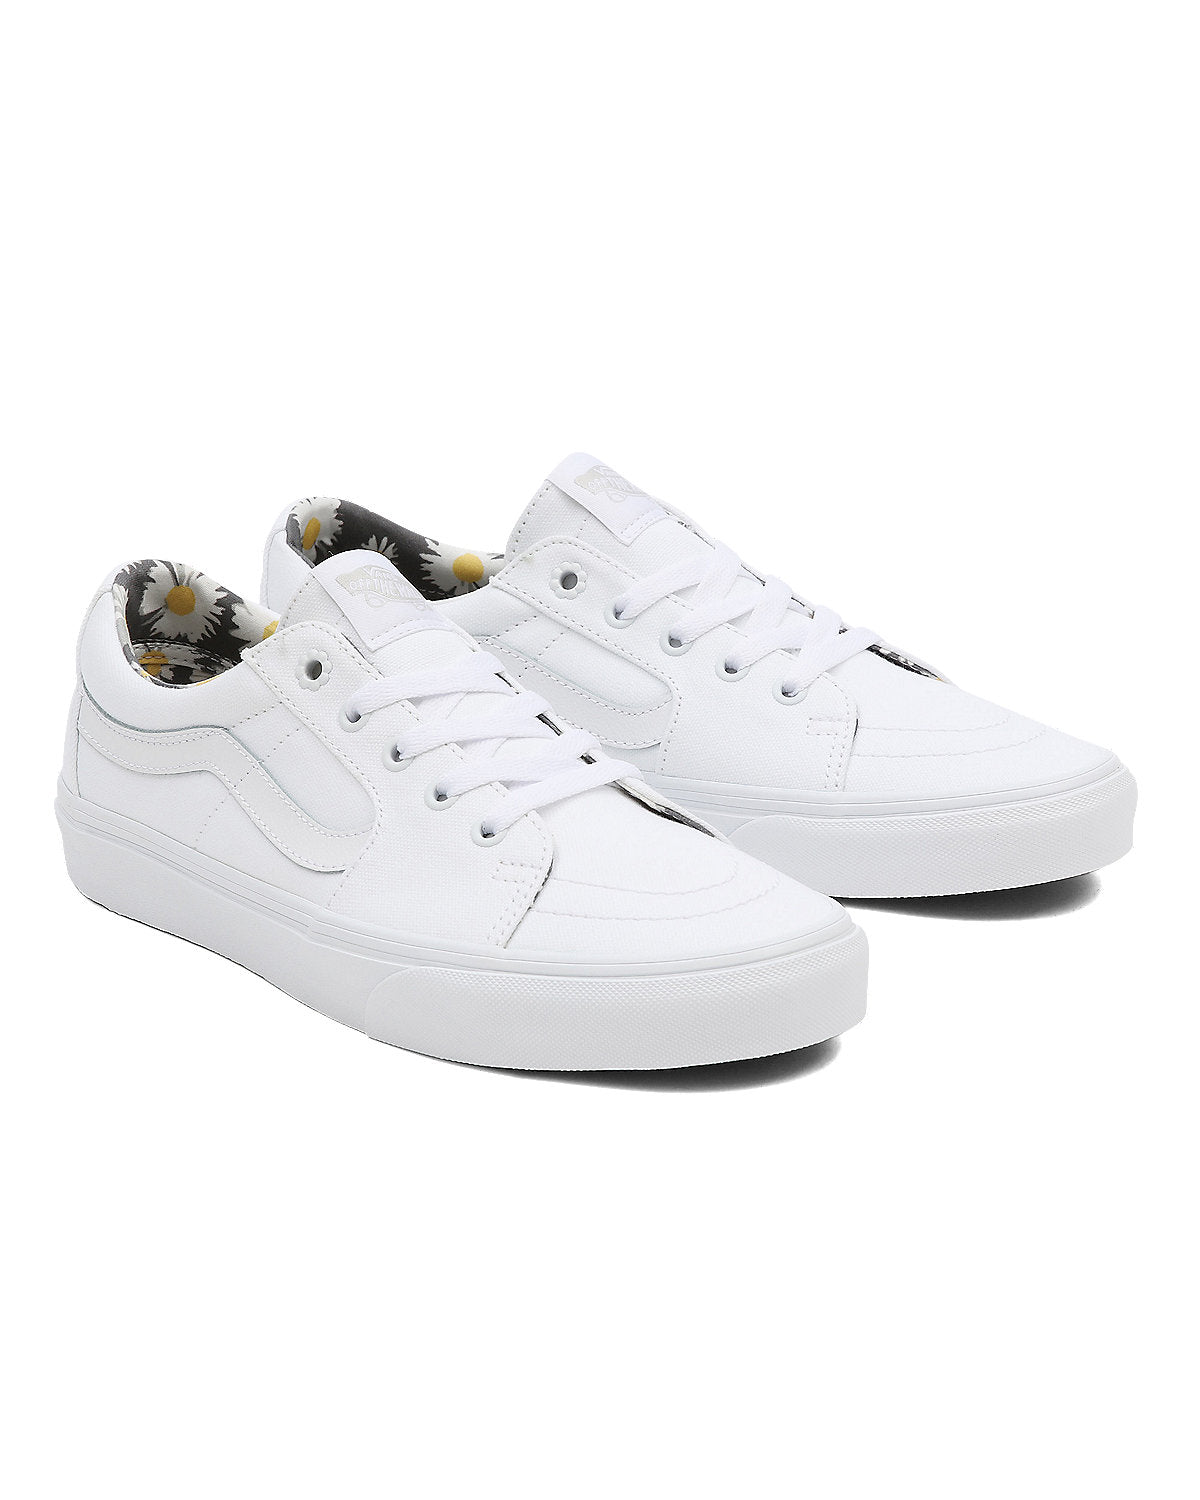 VANS Unisex Sk8-Low Smell The Flowers Trainers - White